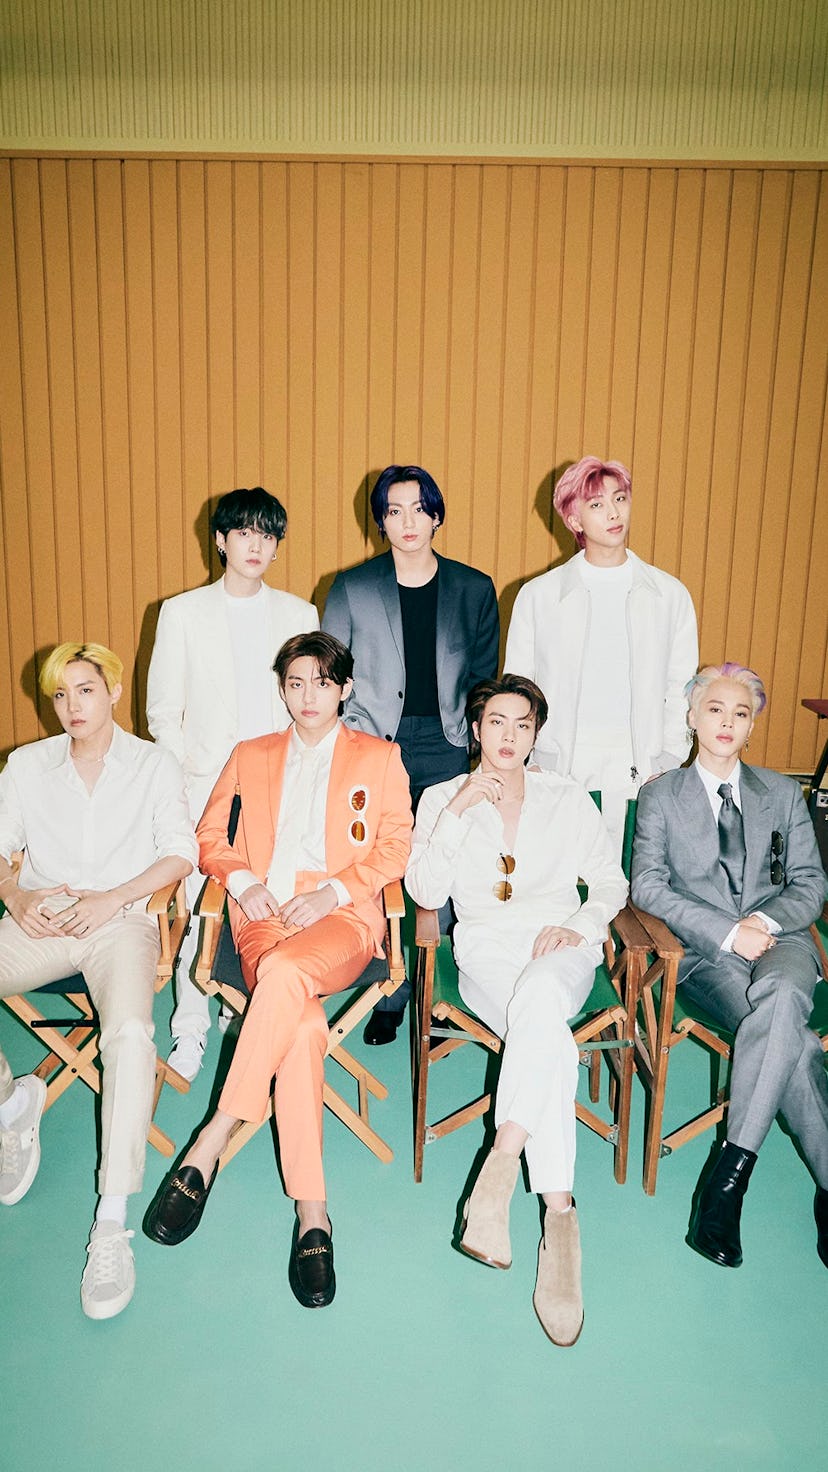 The members of BTS stand and sit in chairs as they gaze into the camera